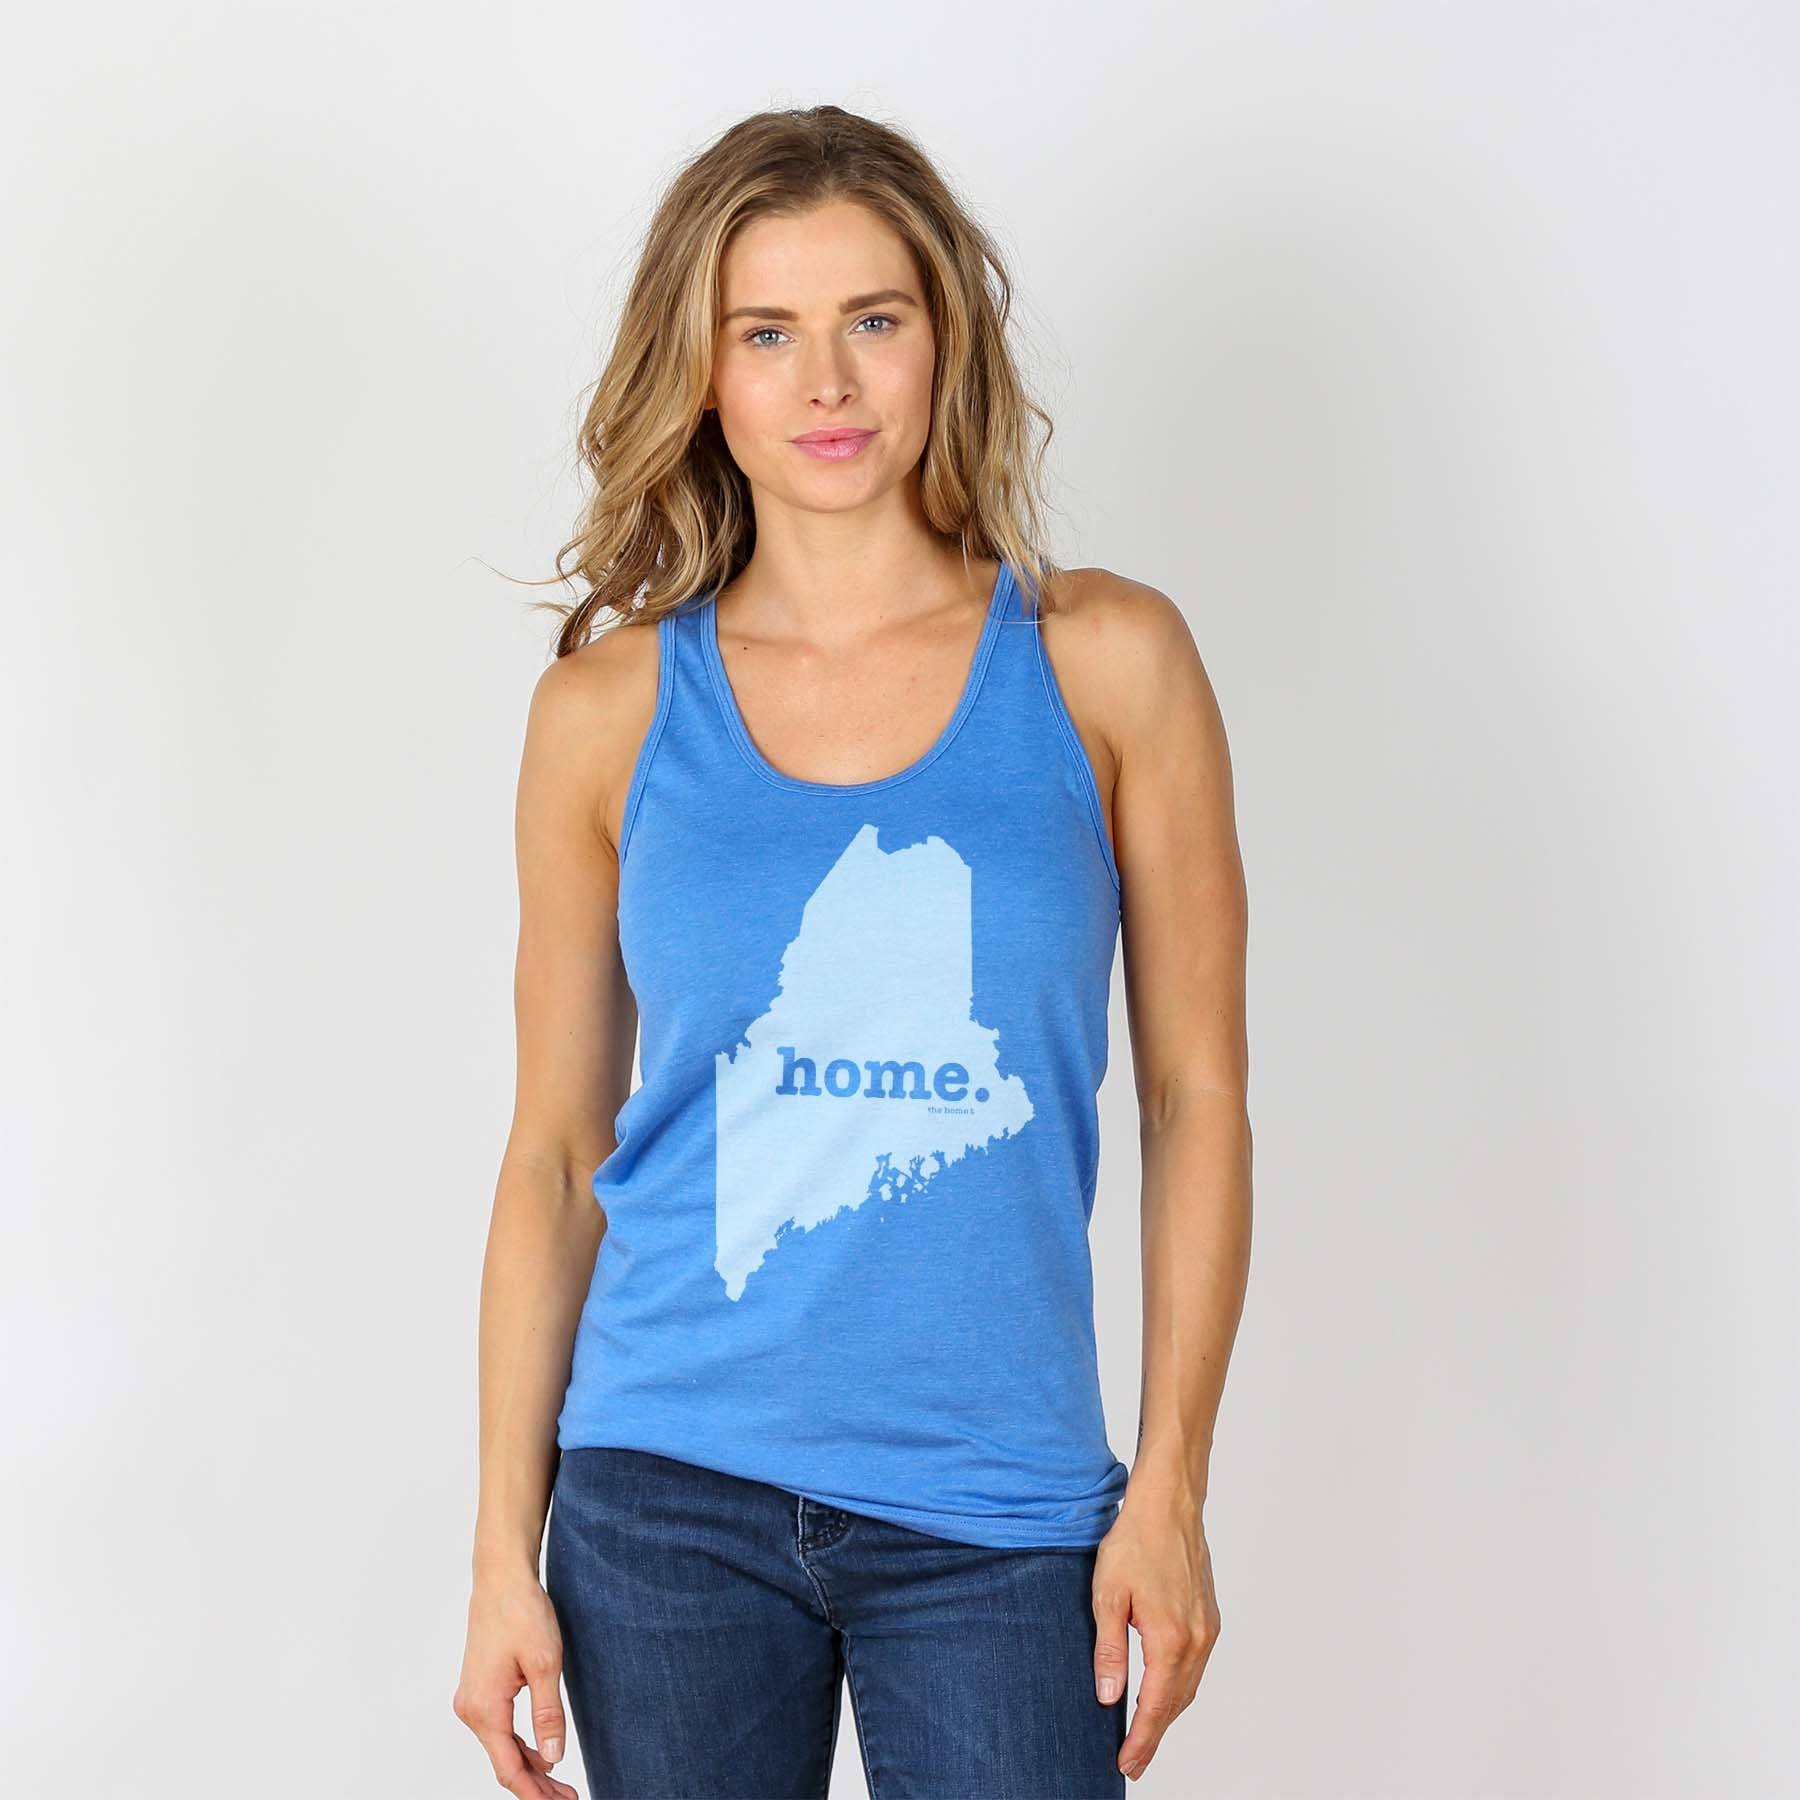 Maine Home Tank Top Tank Top The Home T